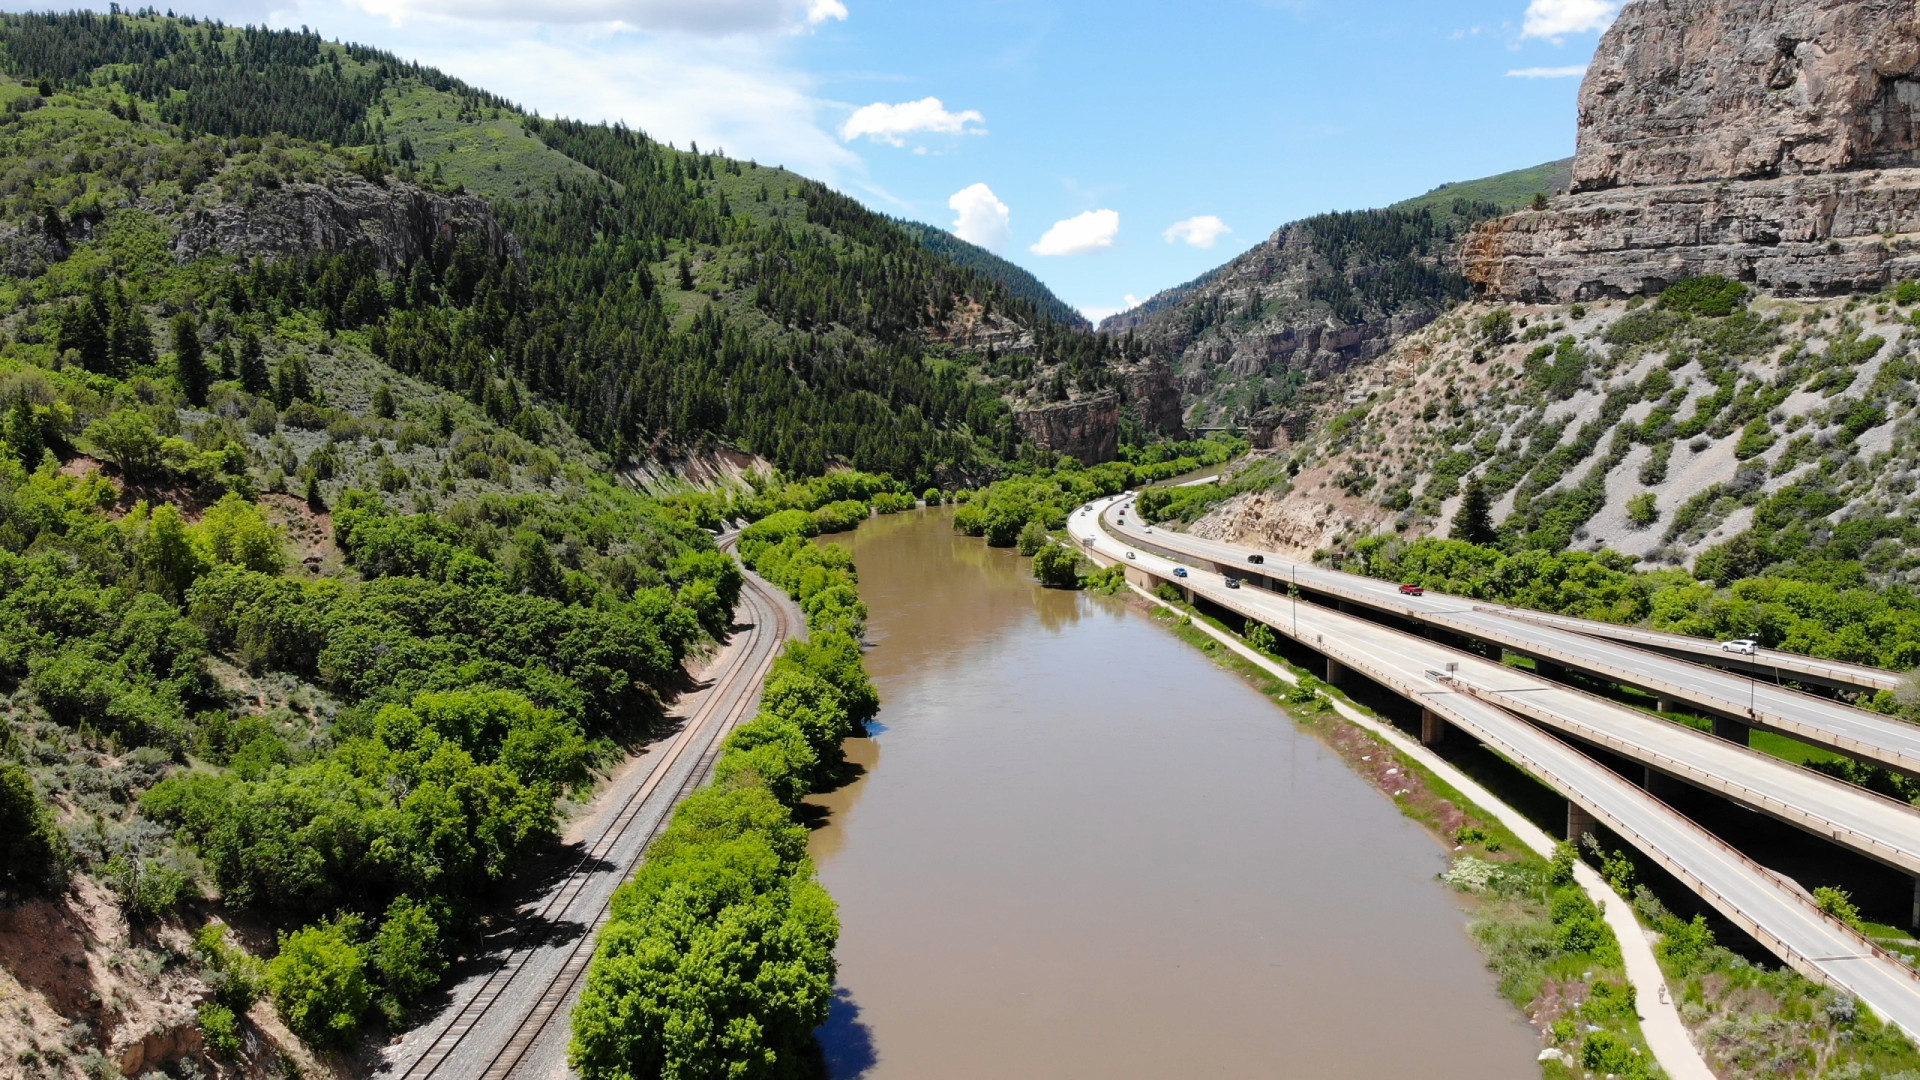 <p>The original Interstate Highway System was proclaimed to be completed with the opening of the last section of Interstate 70 (I-70), the 15-mile (24-km) Glenwood Canyon.</p><p><a href="https://www.msn.com/en-us/community/channel/vid-7xx8mnucu55yw63we9va2gwr7uihbxwc68fxqp25x6tg4ftibpra?cvid=94631541bc0f4f89bfd59158d696ad7e">Follow us and access great exclusive content every day</a></p>